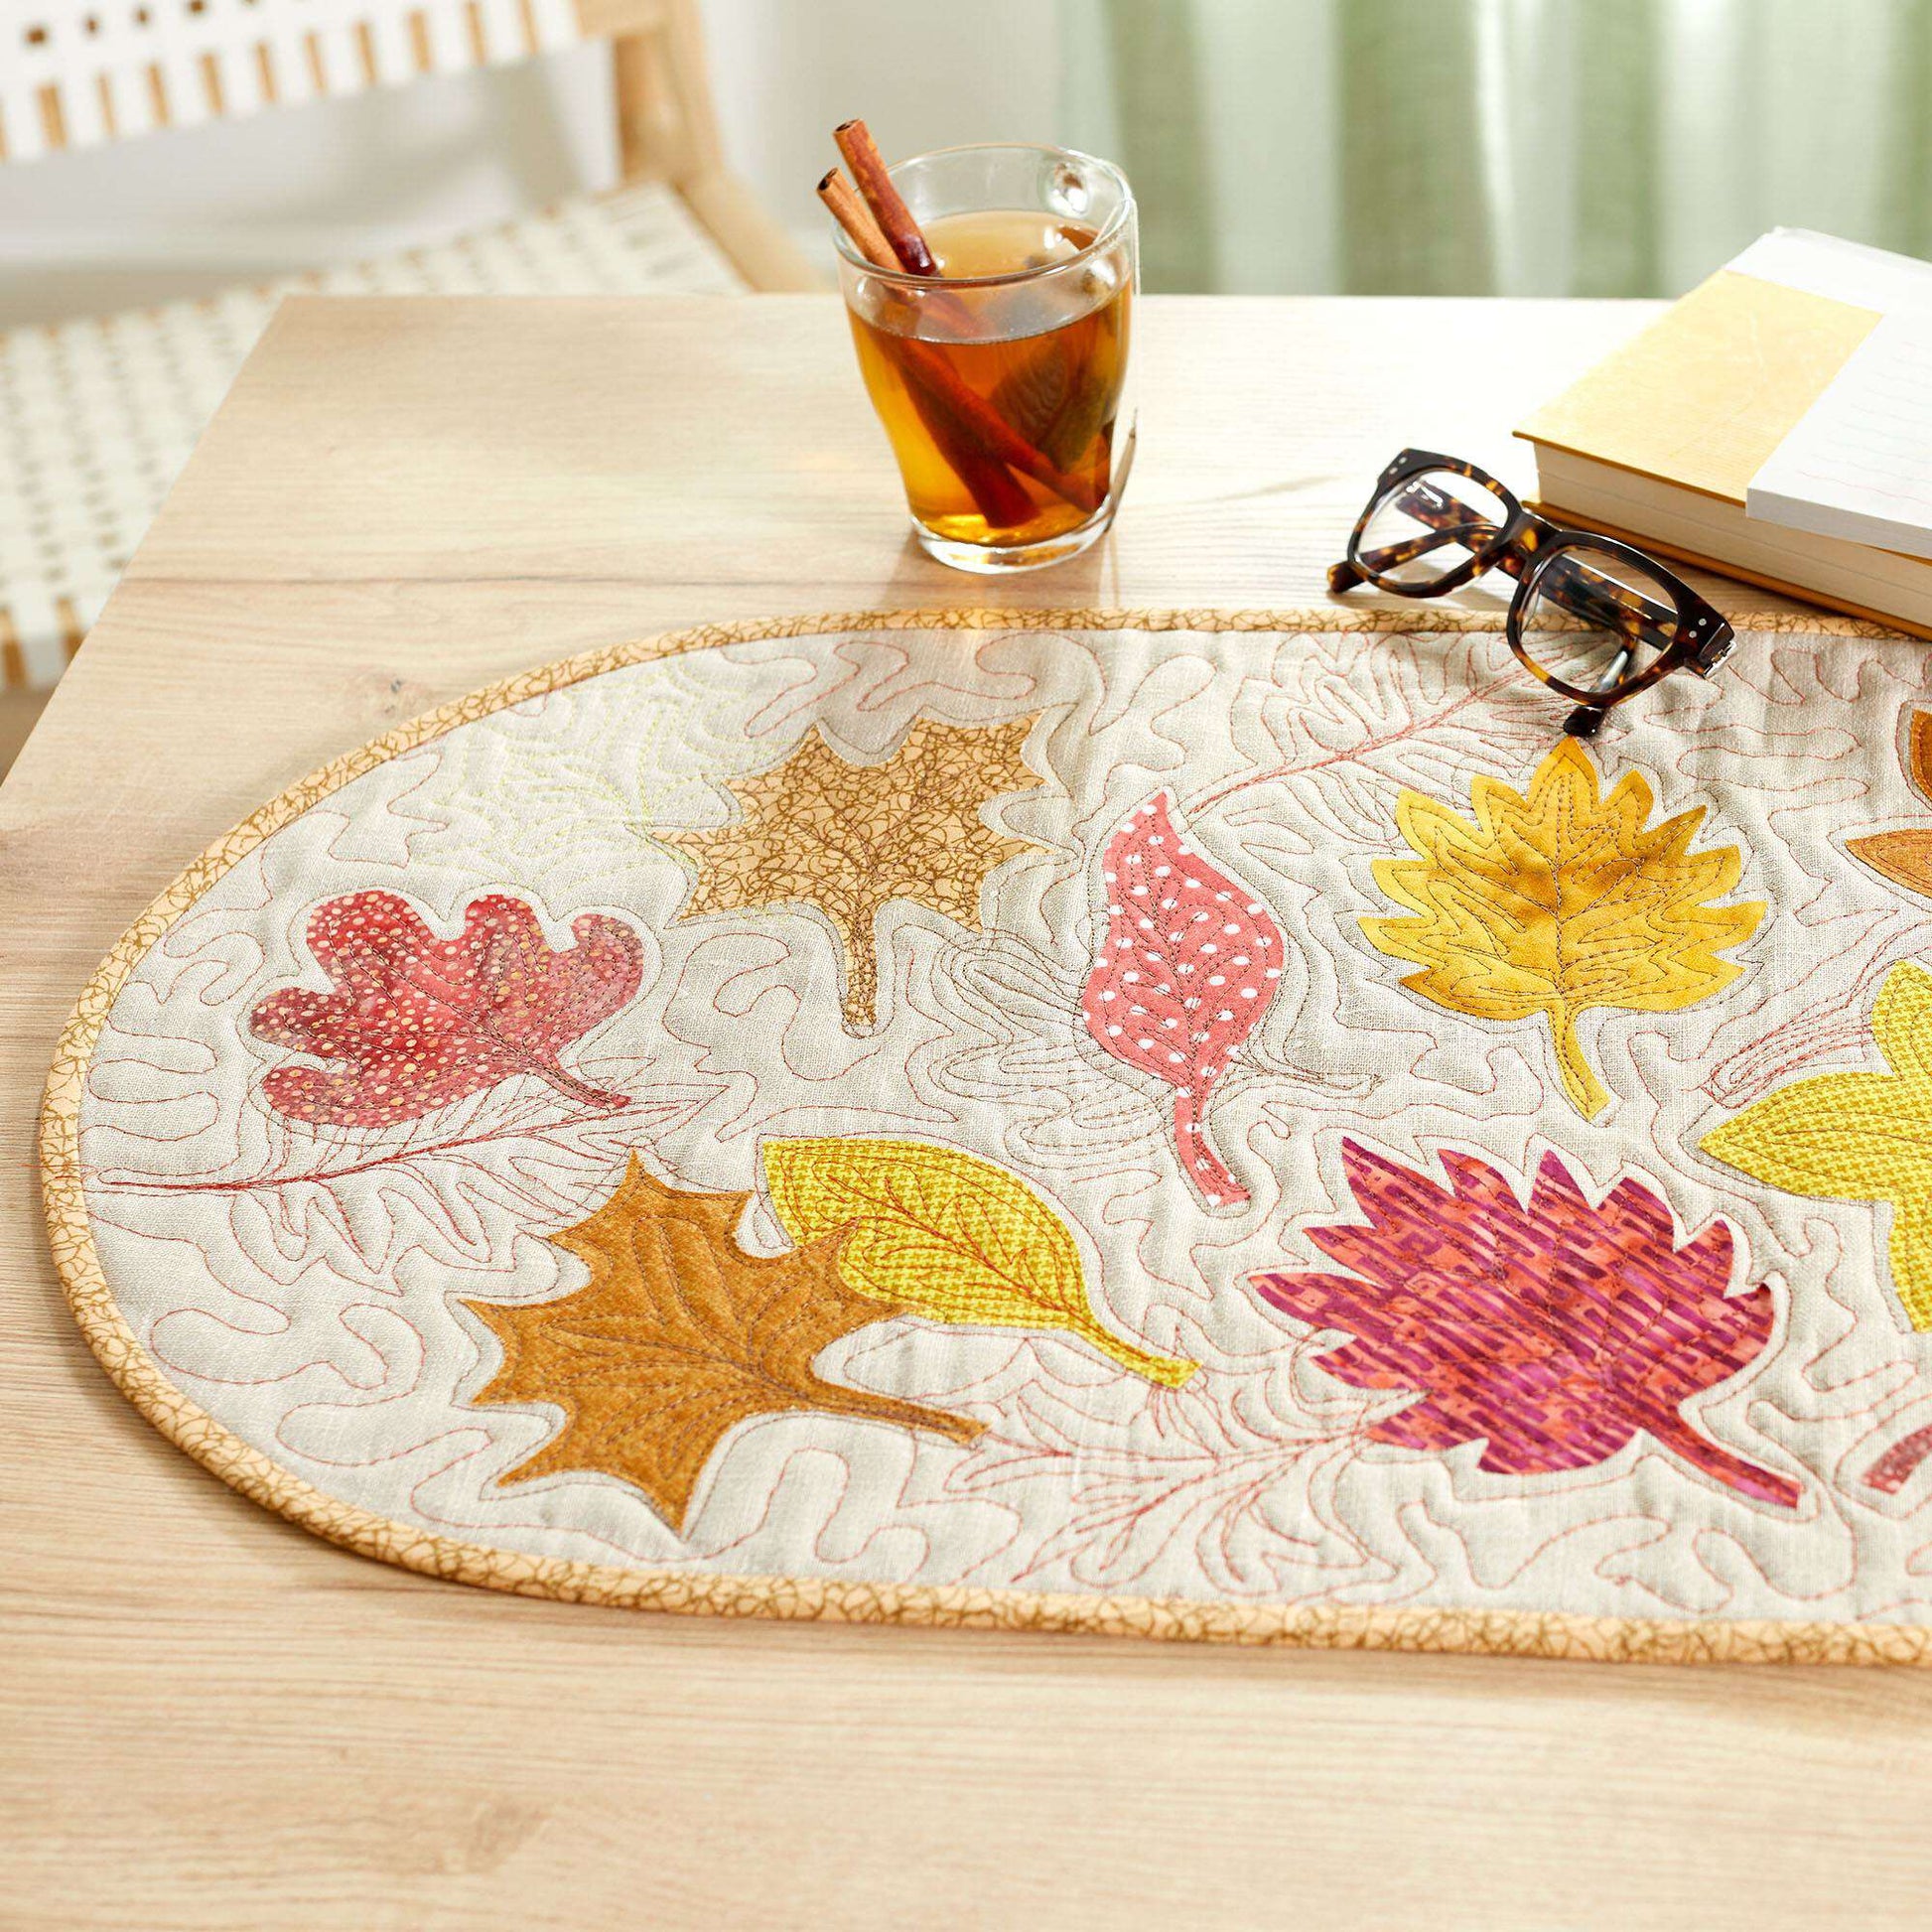 Free Coats Sewing & Clark Autumn Leaf Table Runner Pattern